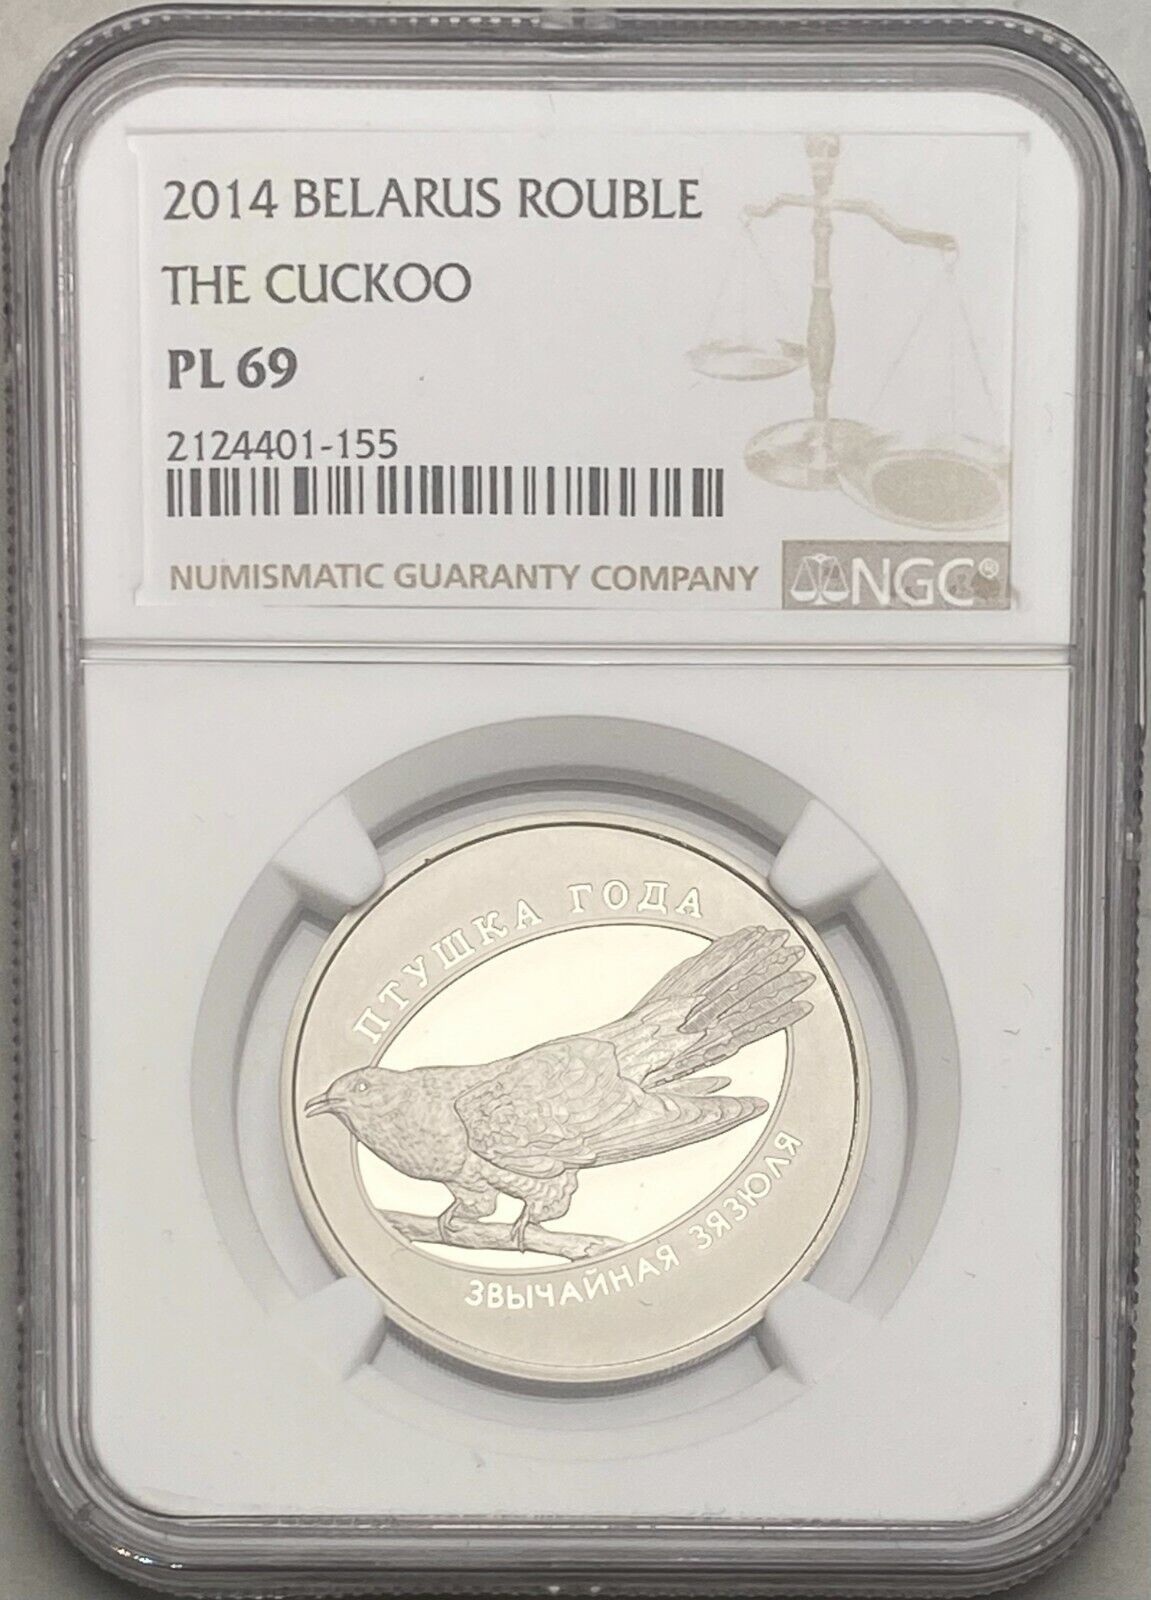 2014 Belarus Rouble The Cuckoo Ngc Pl 69 Finest Known Low Mintage *